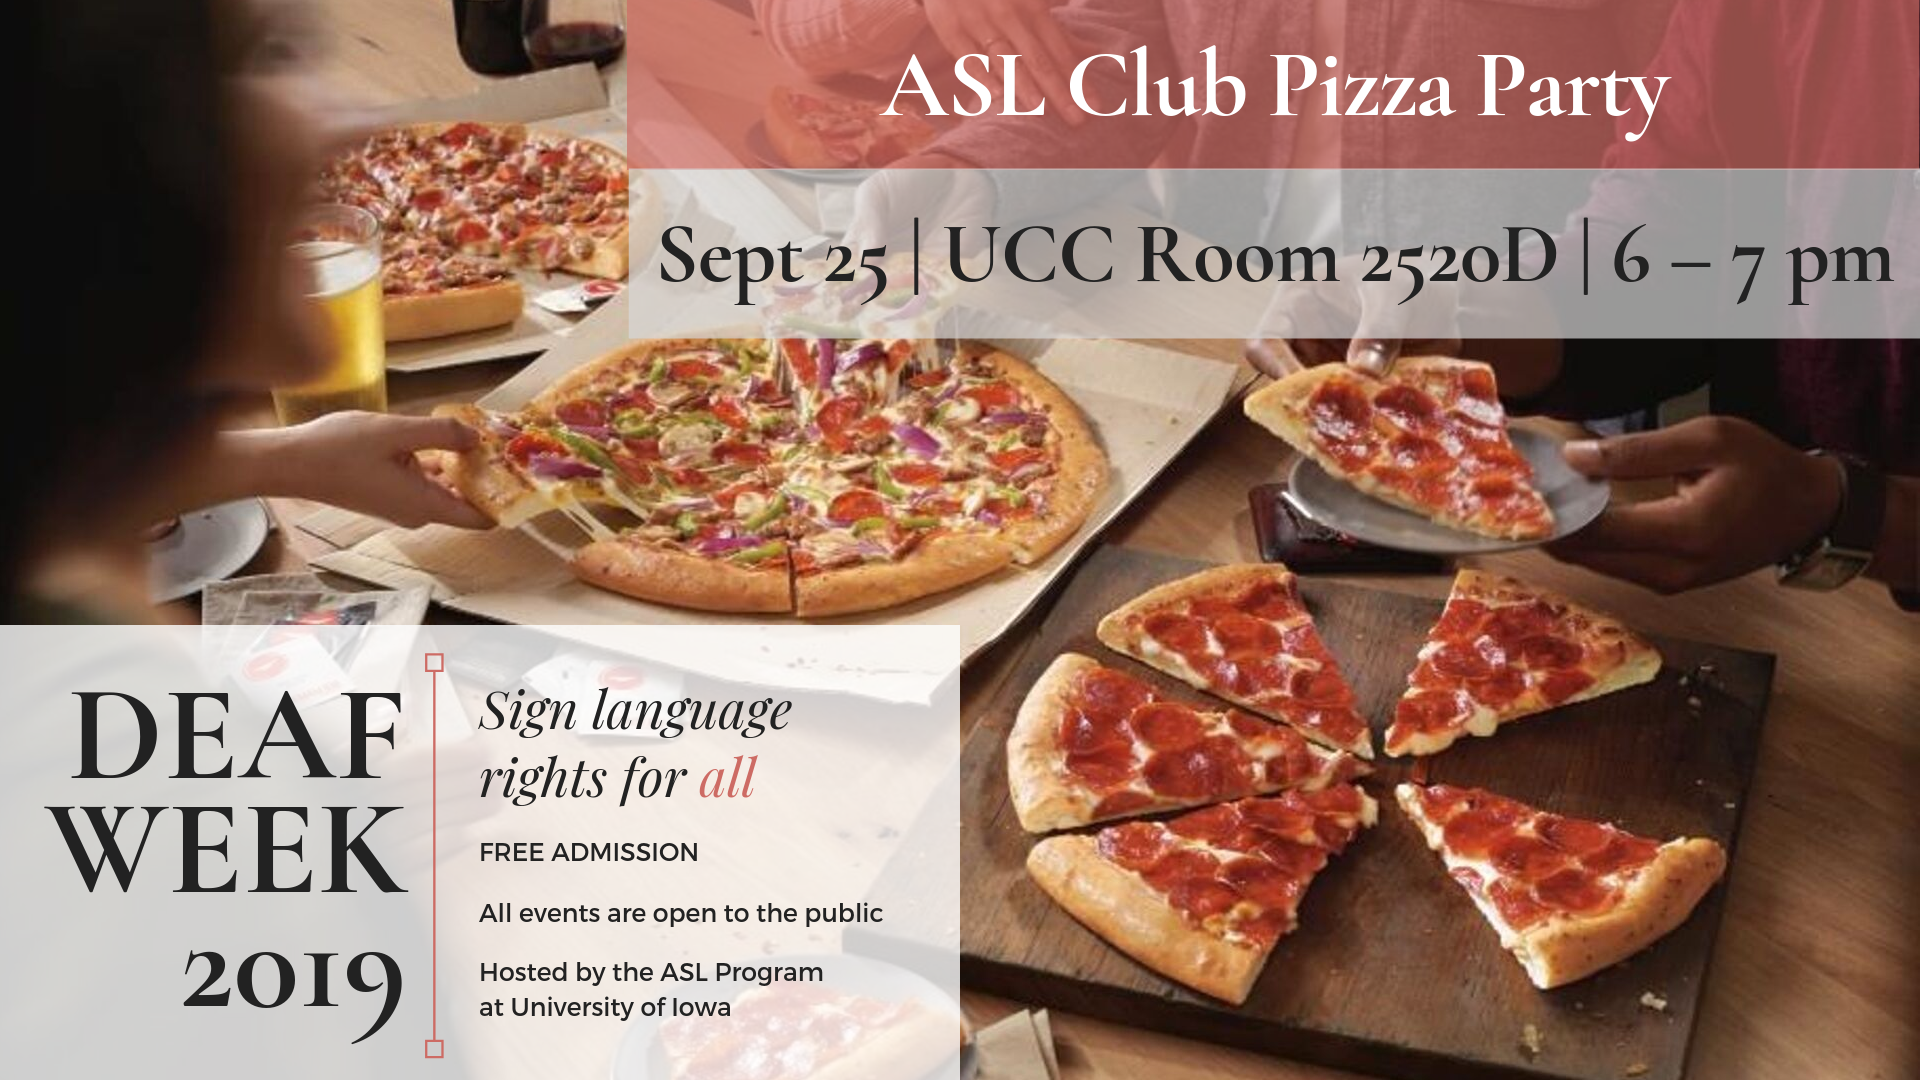 ASL Club Pizza Party September 25 in UCC Room2520D at 6-7pm Deaf Week 2019 Sign language rights for all Free Admission All events are open to the public Hosted by the ASL Department at the University of Iowa